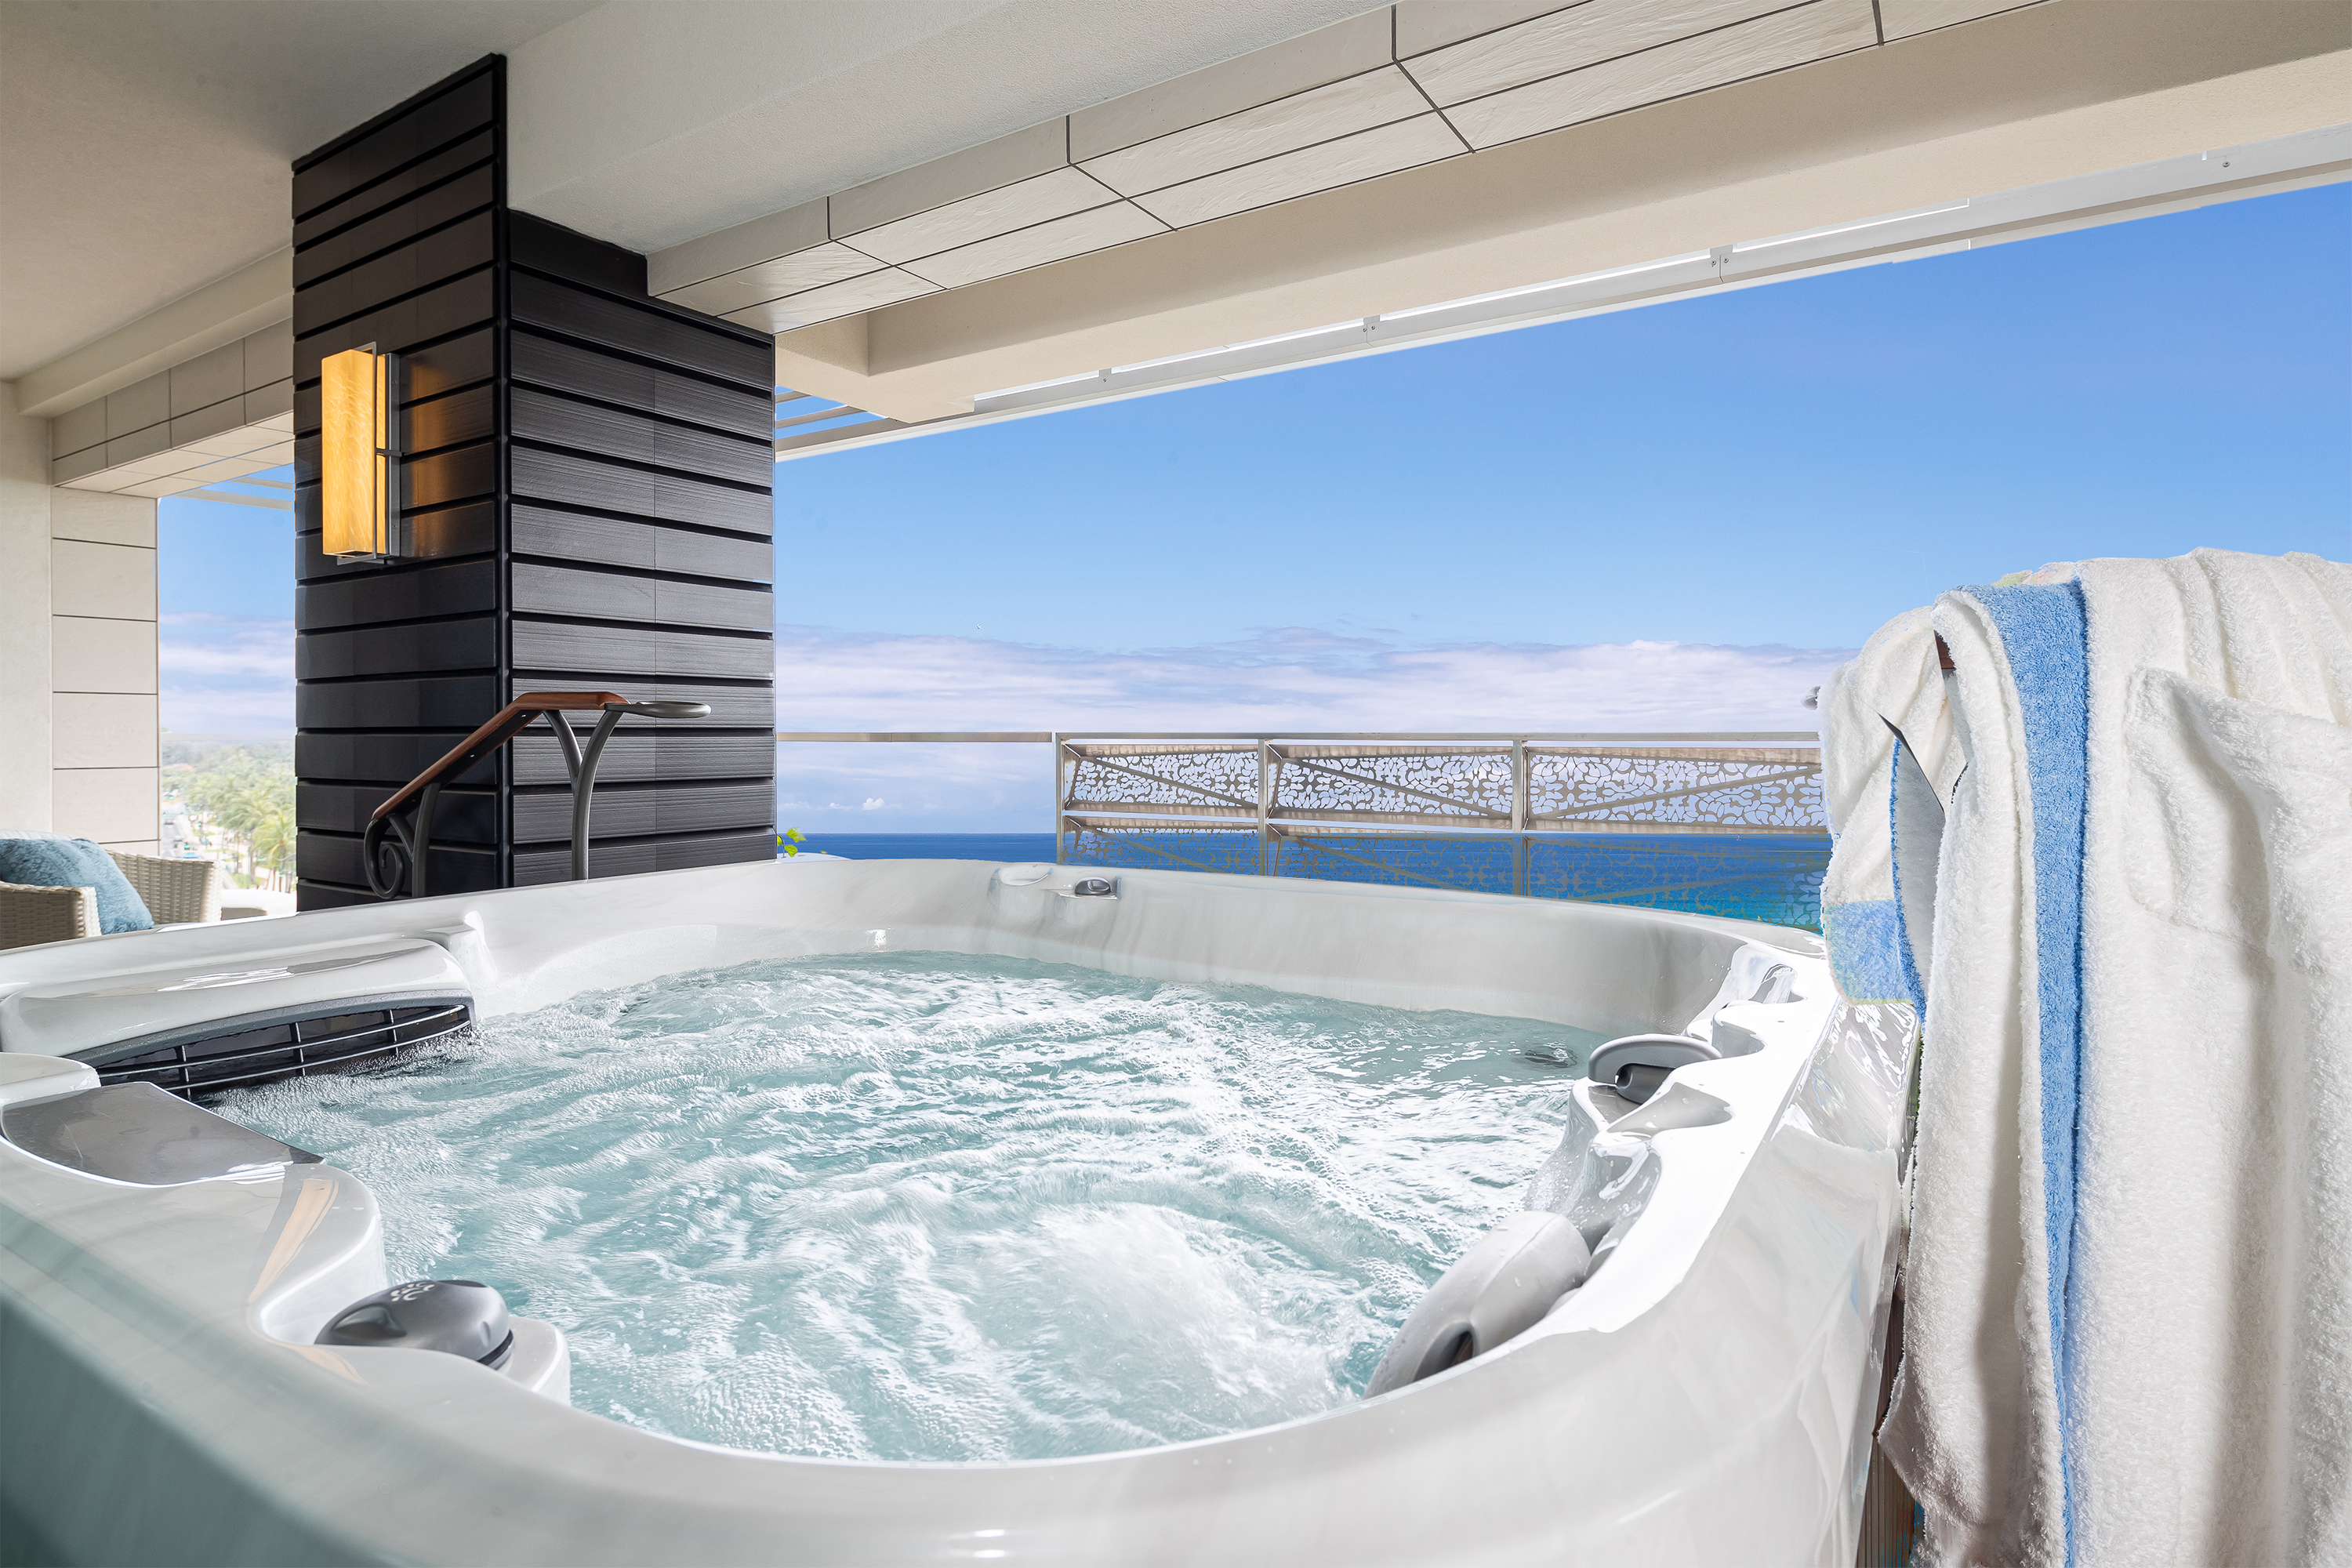 Jacuzzi on balcony with ocen views